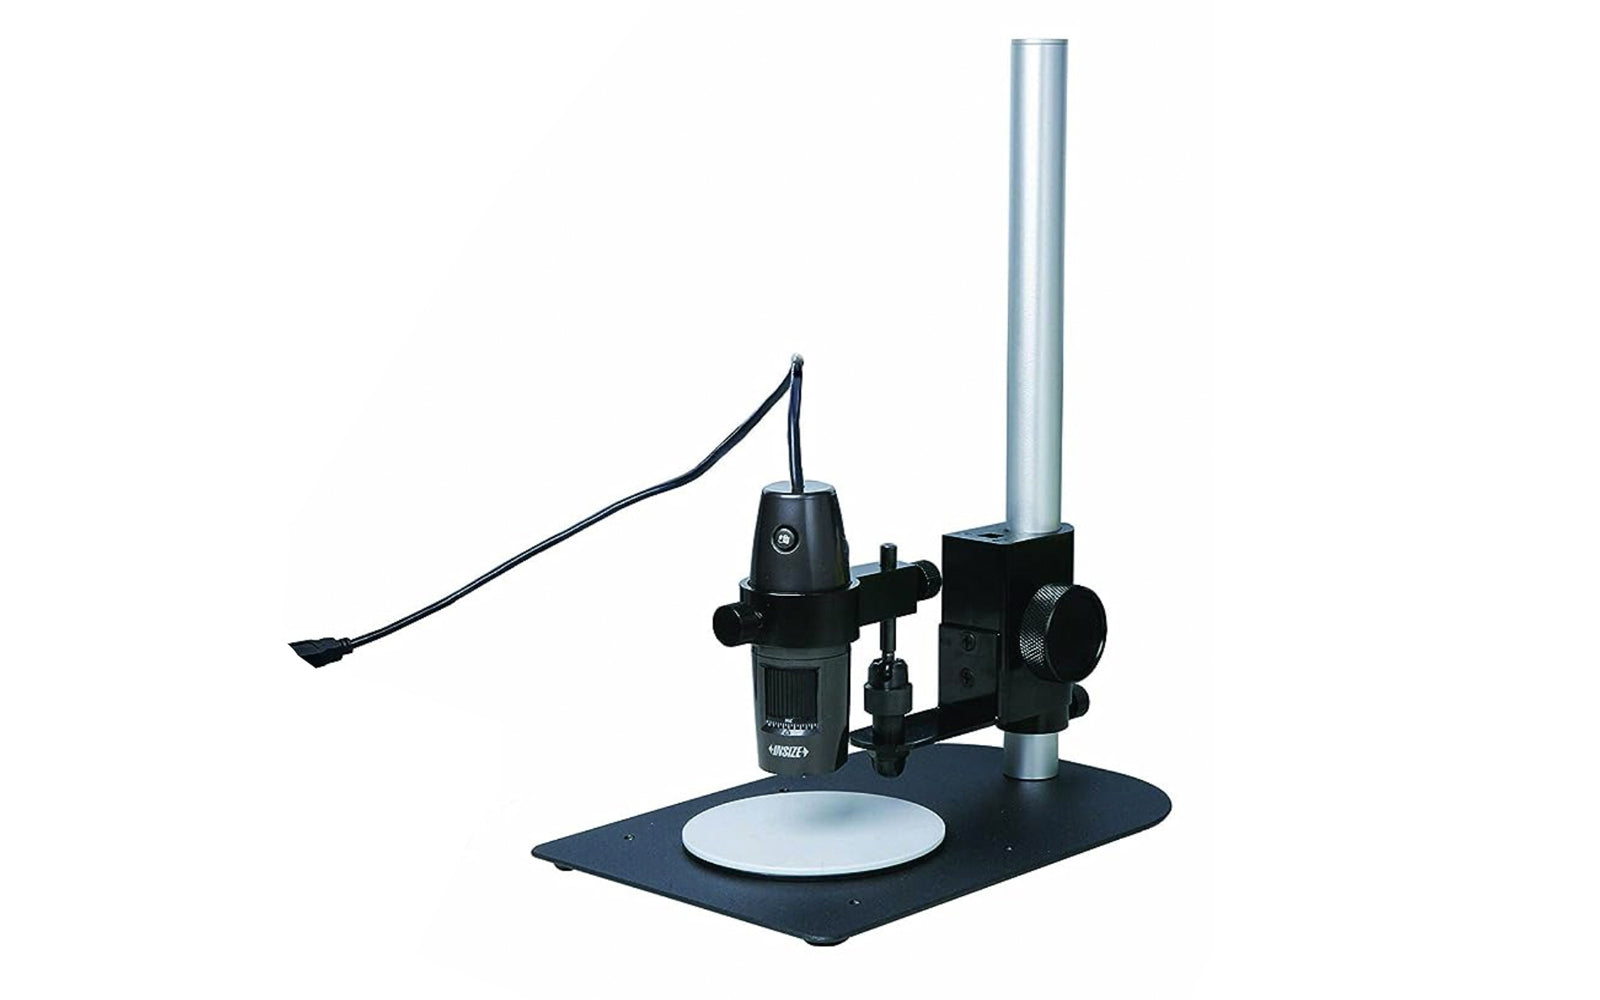 Insize Digital Measuring Microscope ISM-PM200SA. Able to take pictures & videos. Magnification: 10X-200X. Pixel: 2M (resolution: 1600x1200). With stand. Power Supply: USB Cable.